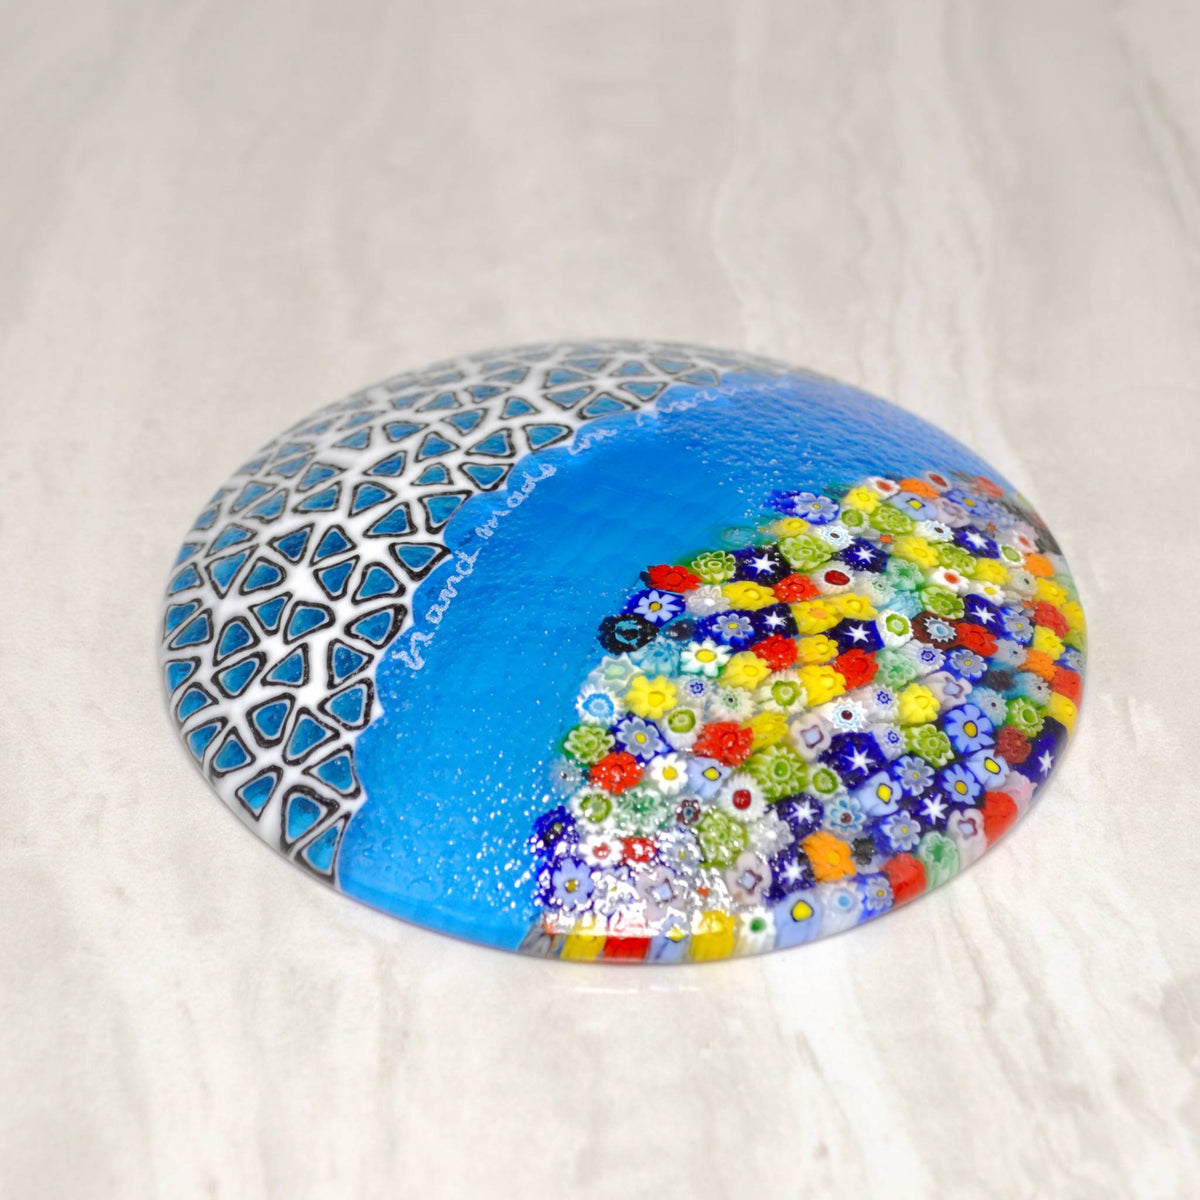 Round Murano Glass Luca Dish with Millefiori, Sky Blue, Signed by the artist - My Italian Decor